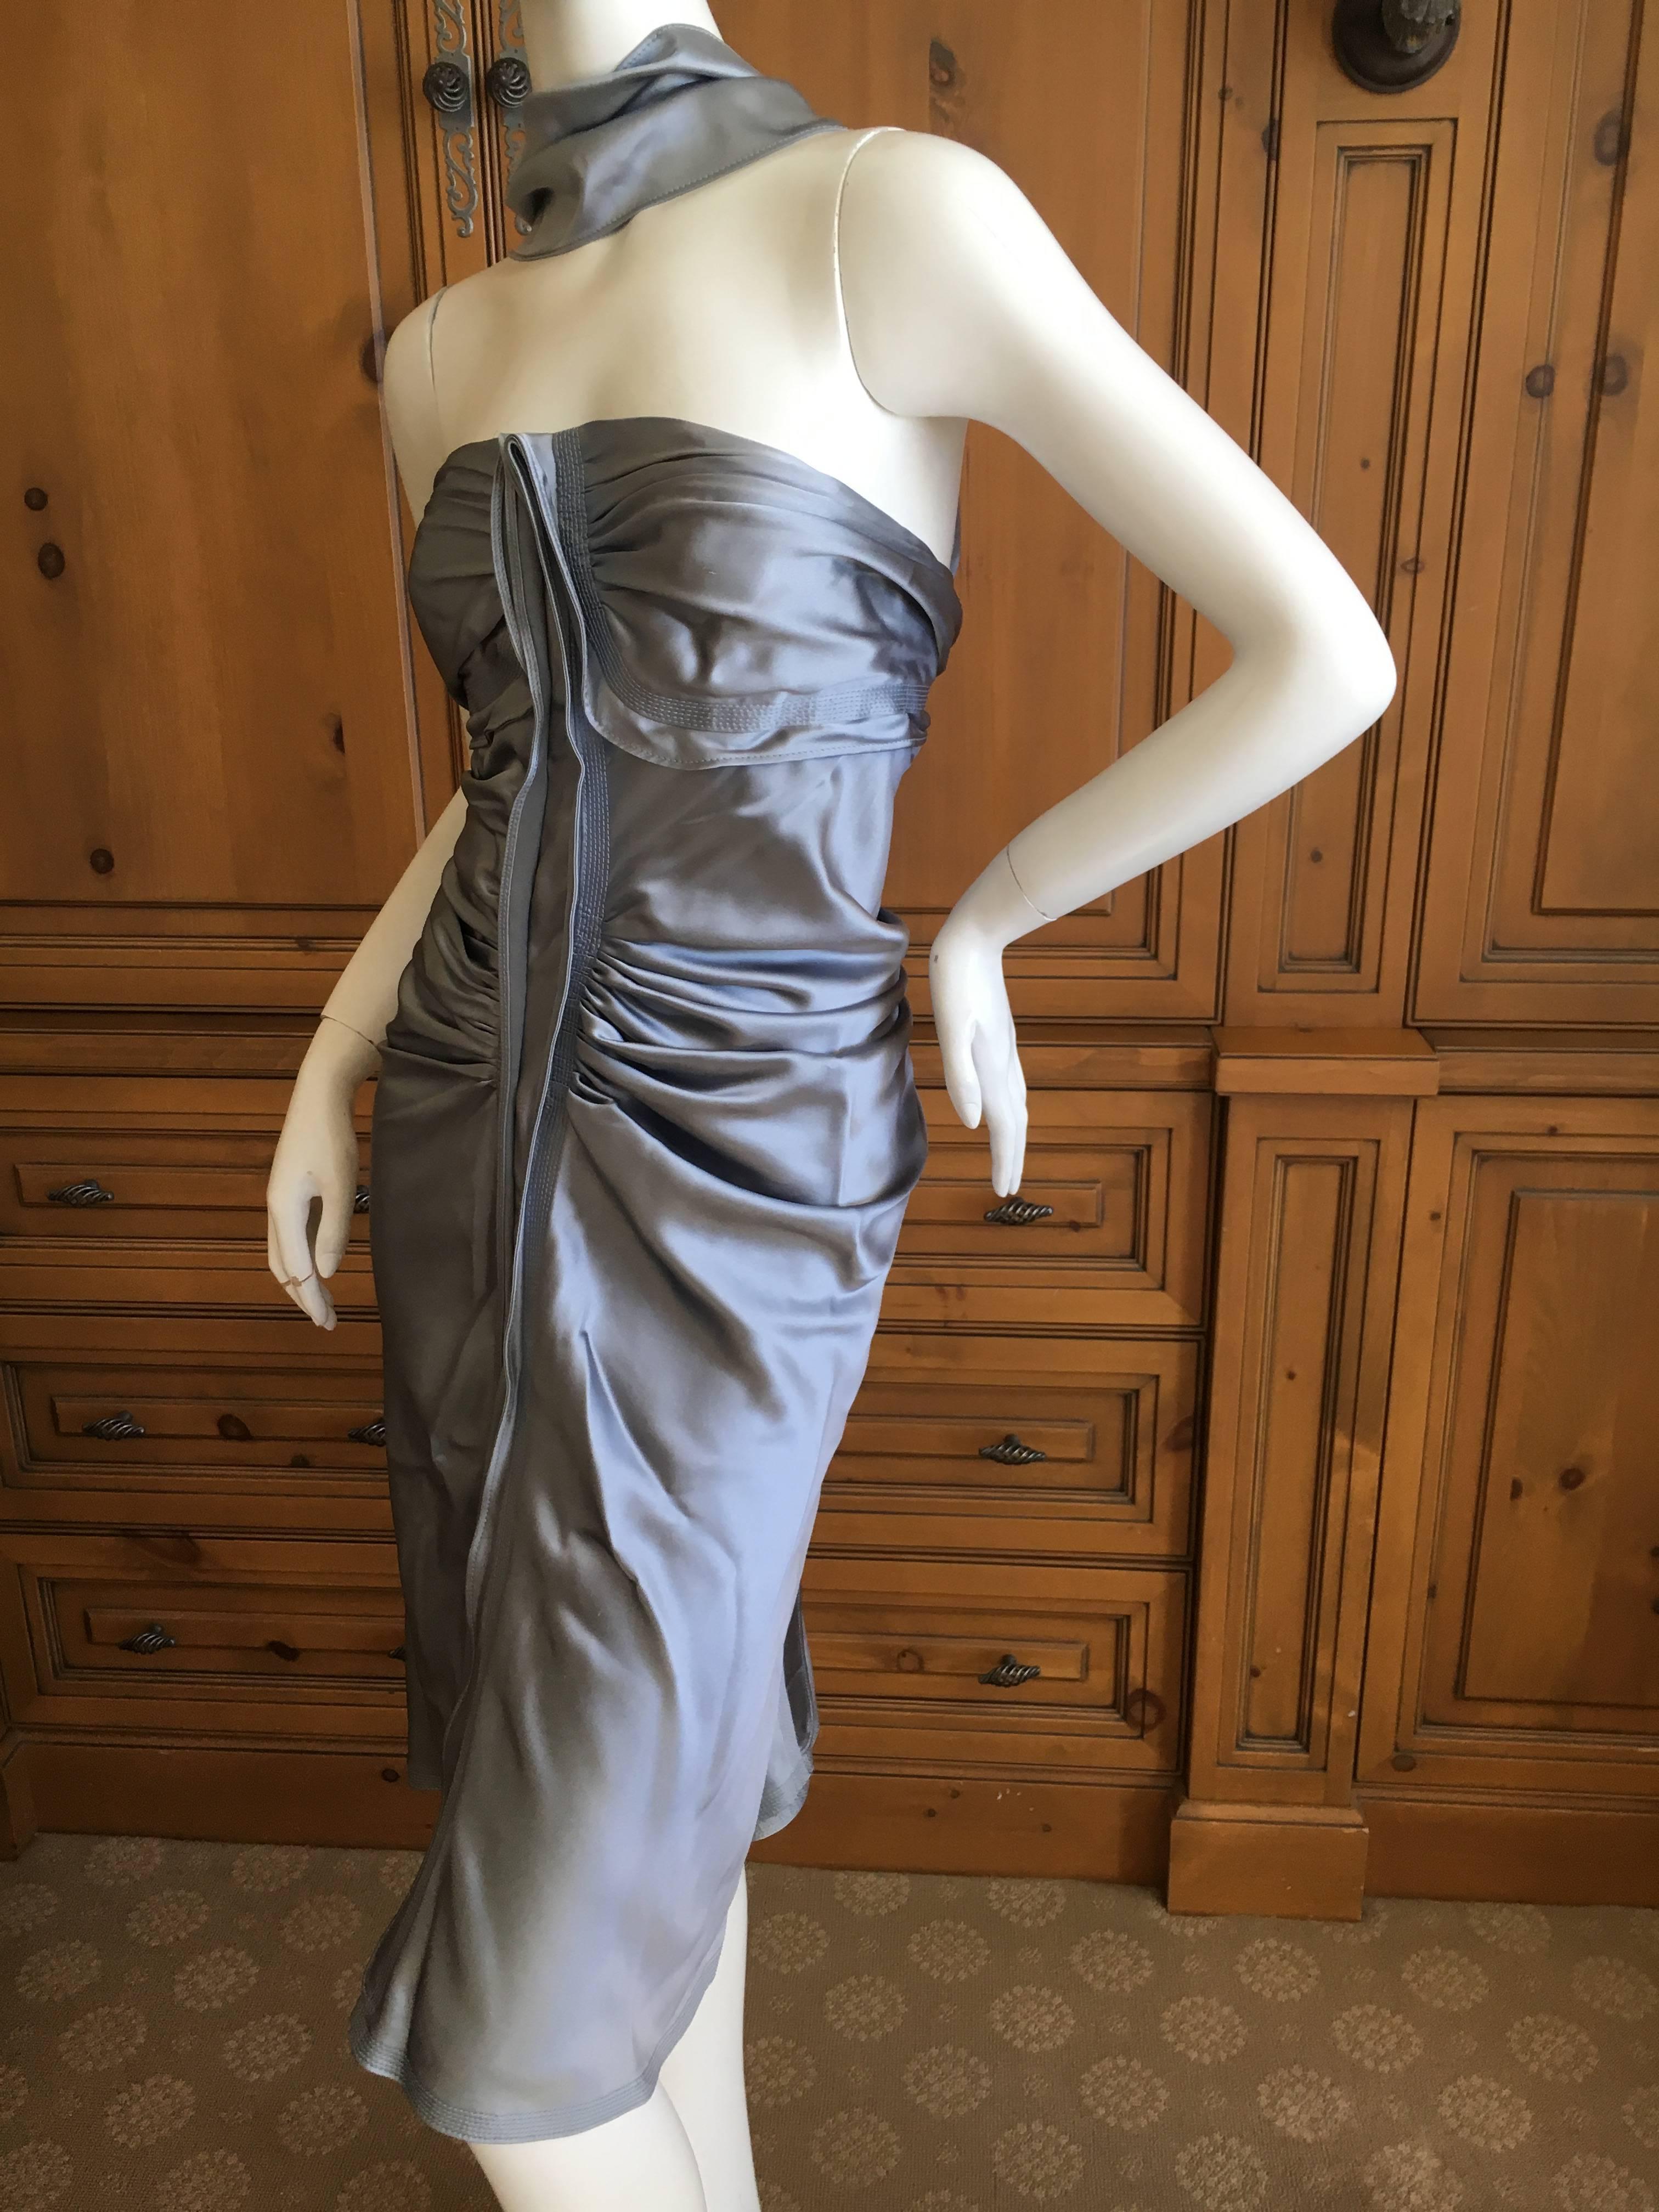 Yves Saint Laurent by Tom Ford Shimmery Silver Silk Dress In Excellent Condition For Sale In Cloverdale, CA